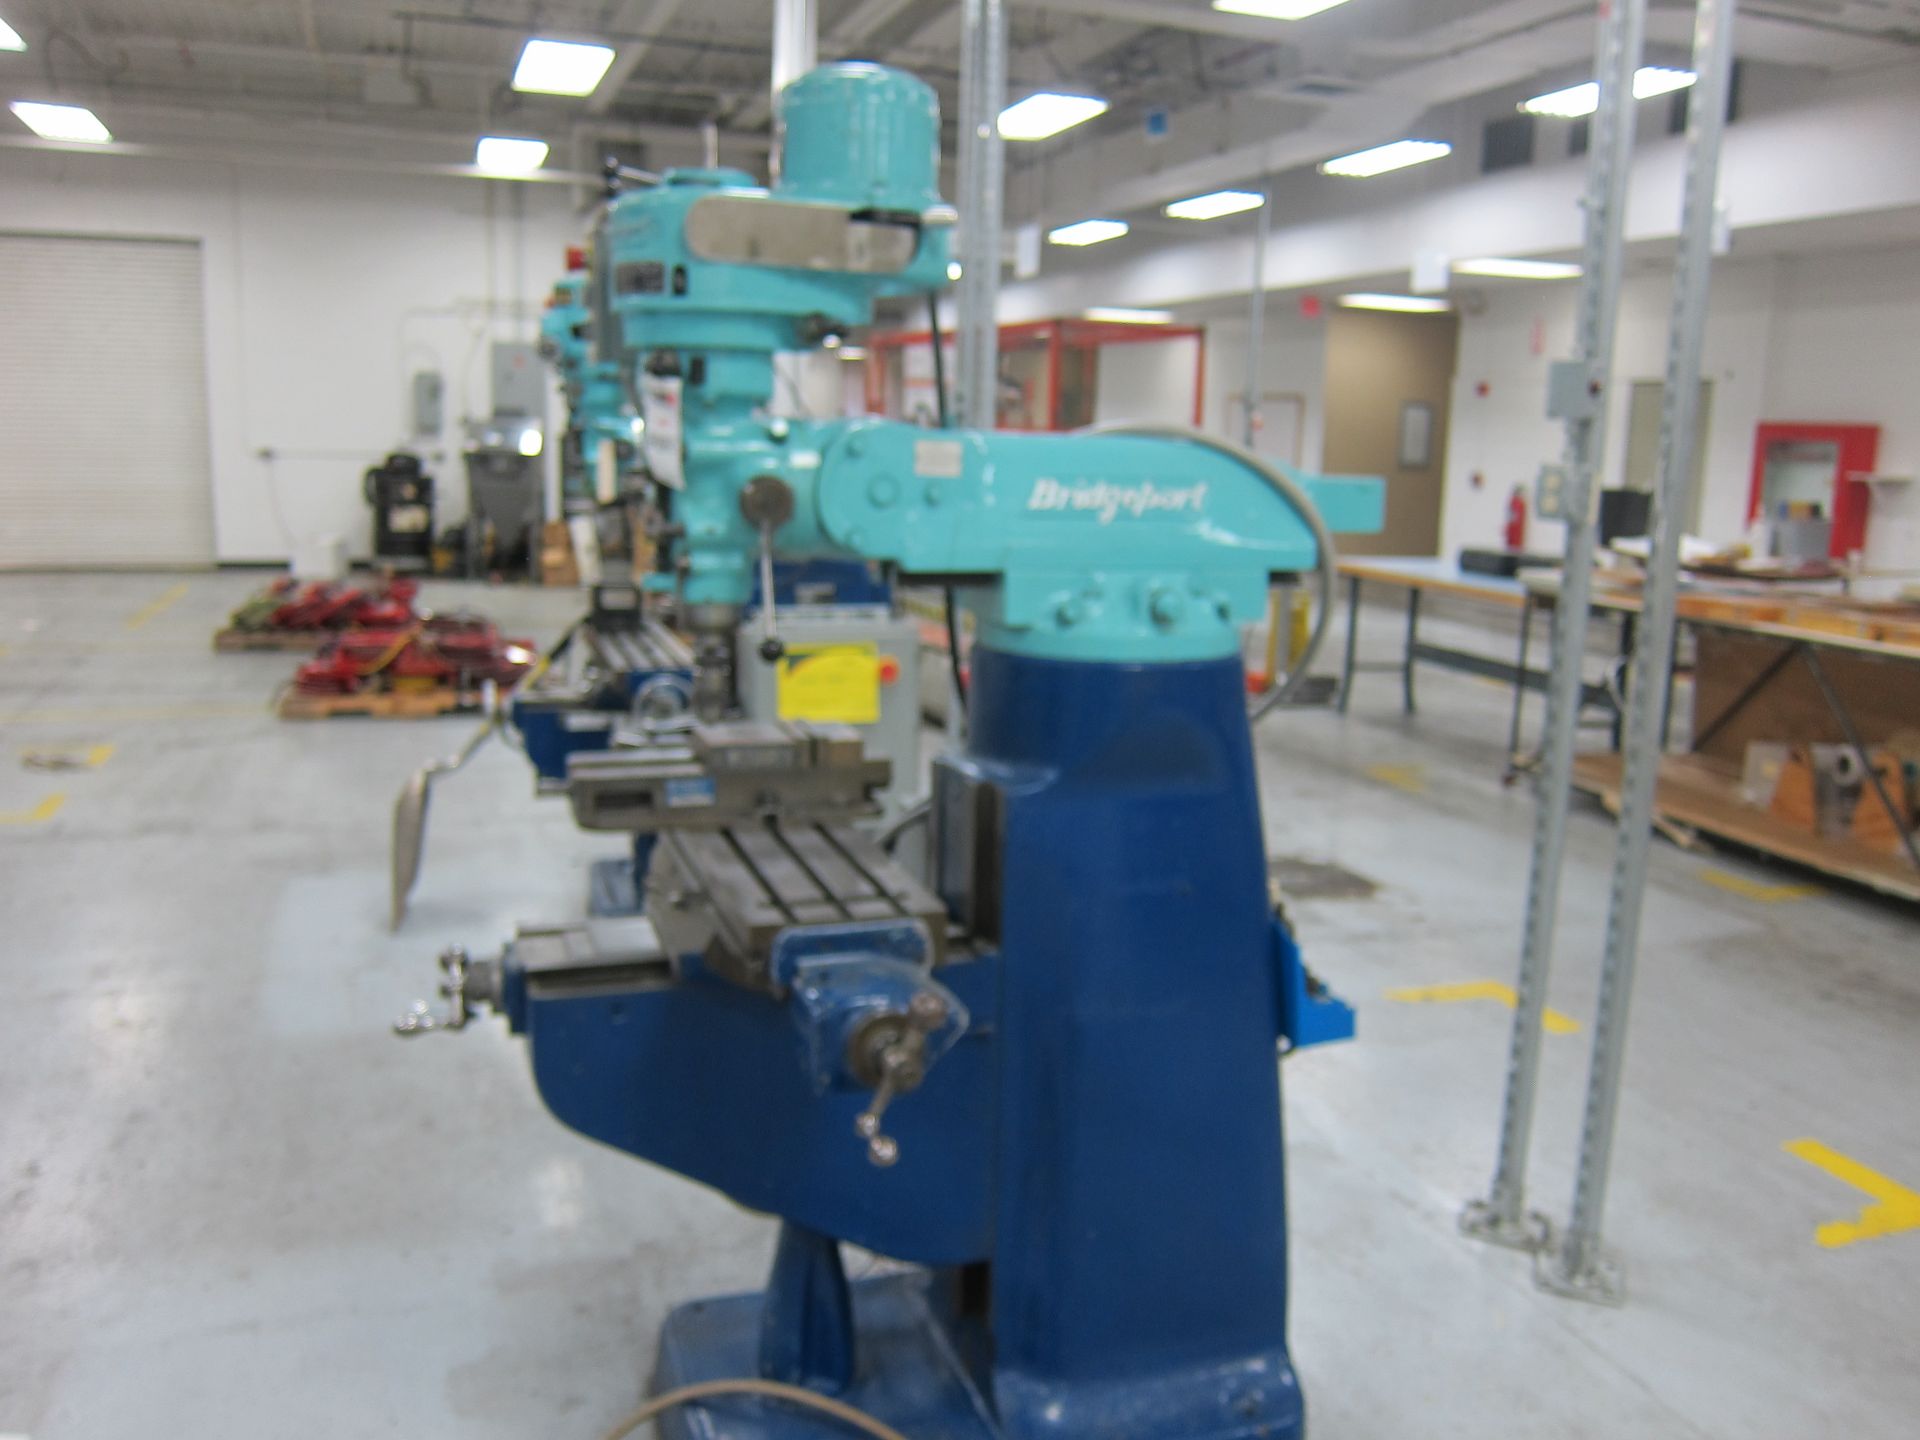 BRIDGEPORT SERIES 1 VERTICAL MILL DRO. POWERFEED AS NEW AS 2003 9'' X 48'' S/N BR212231 SOLD WITH - Image 2 of 2